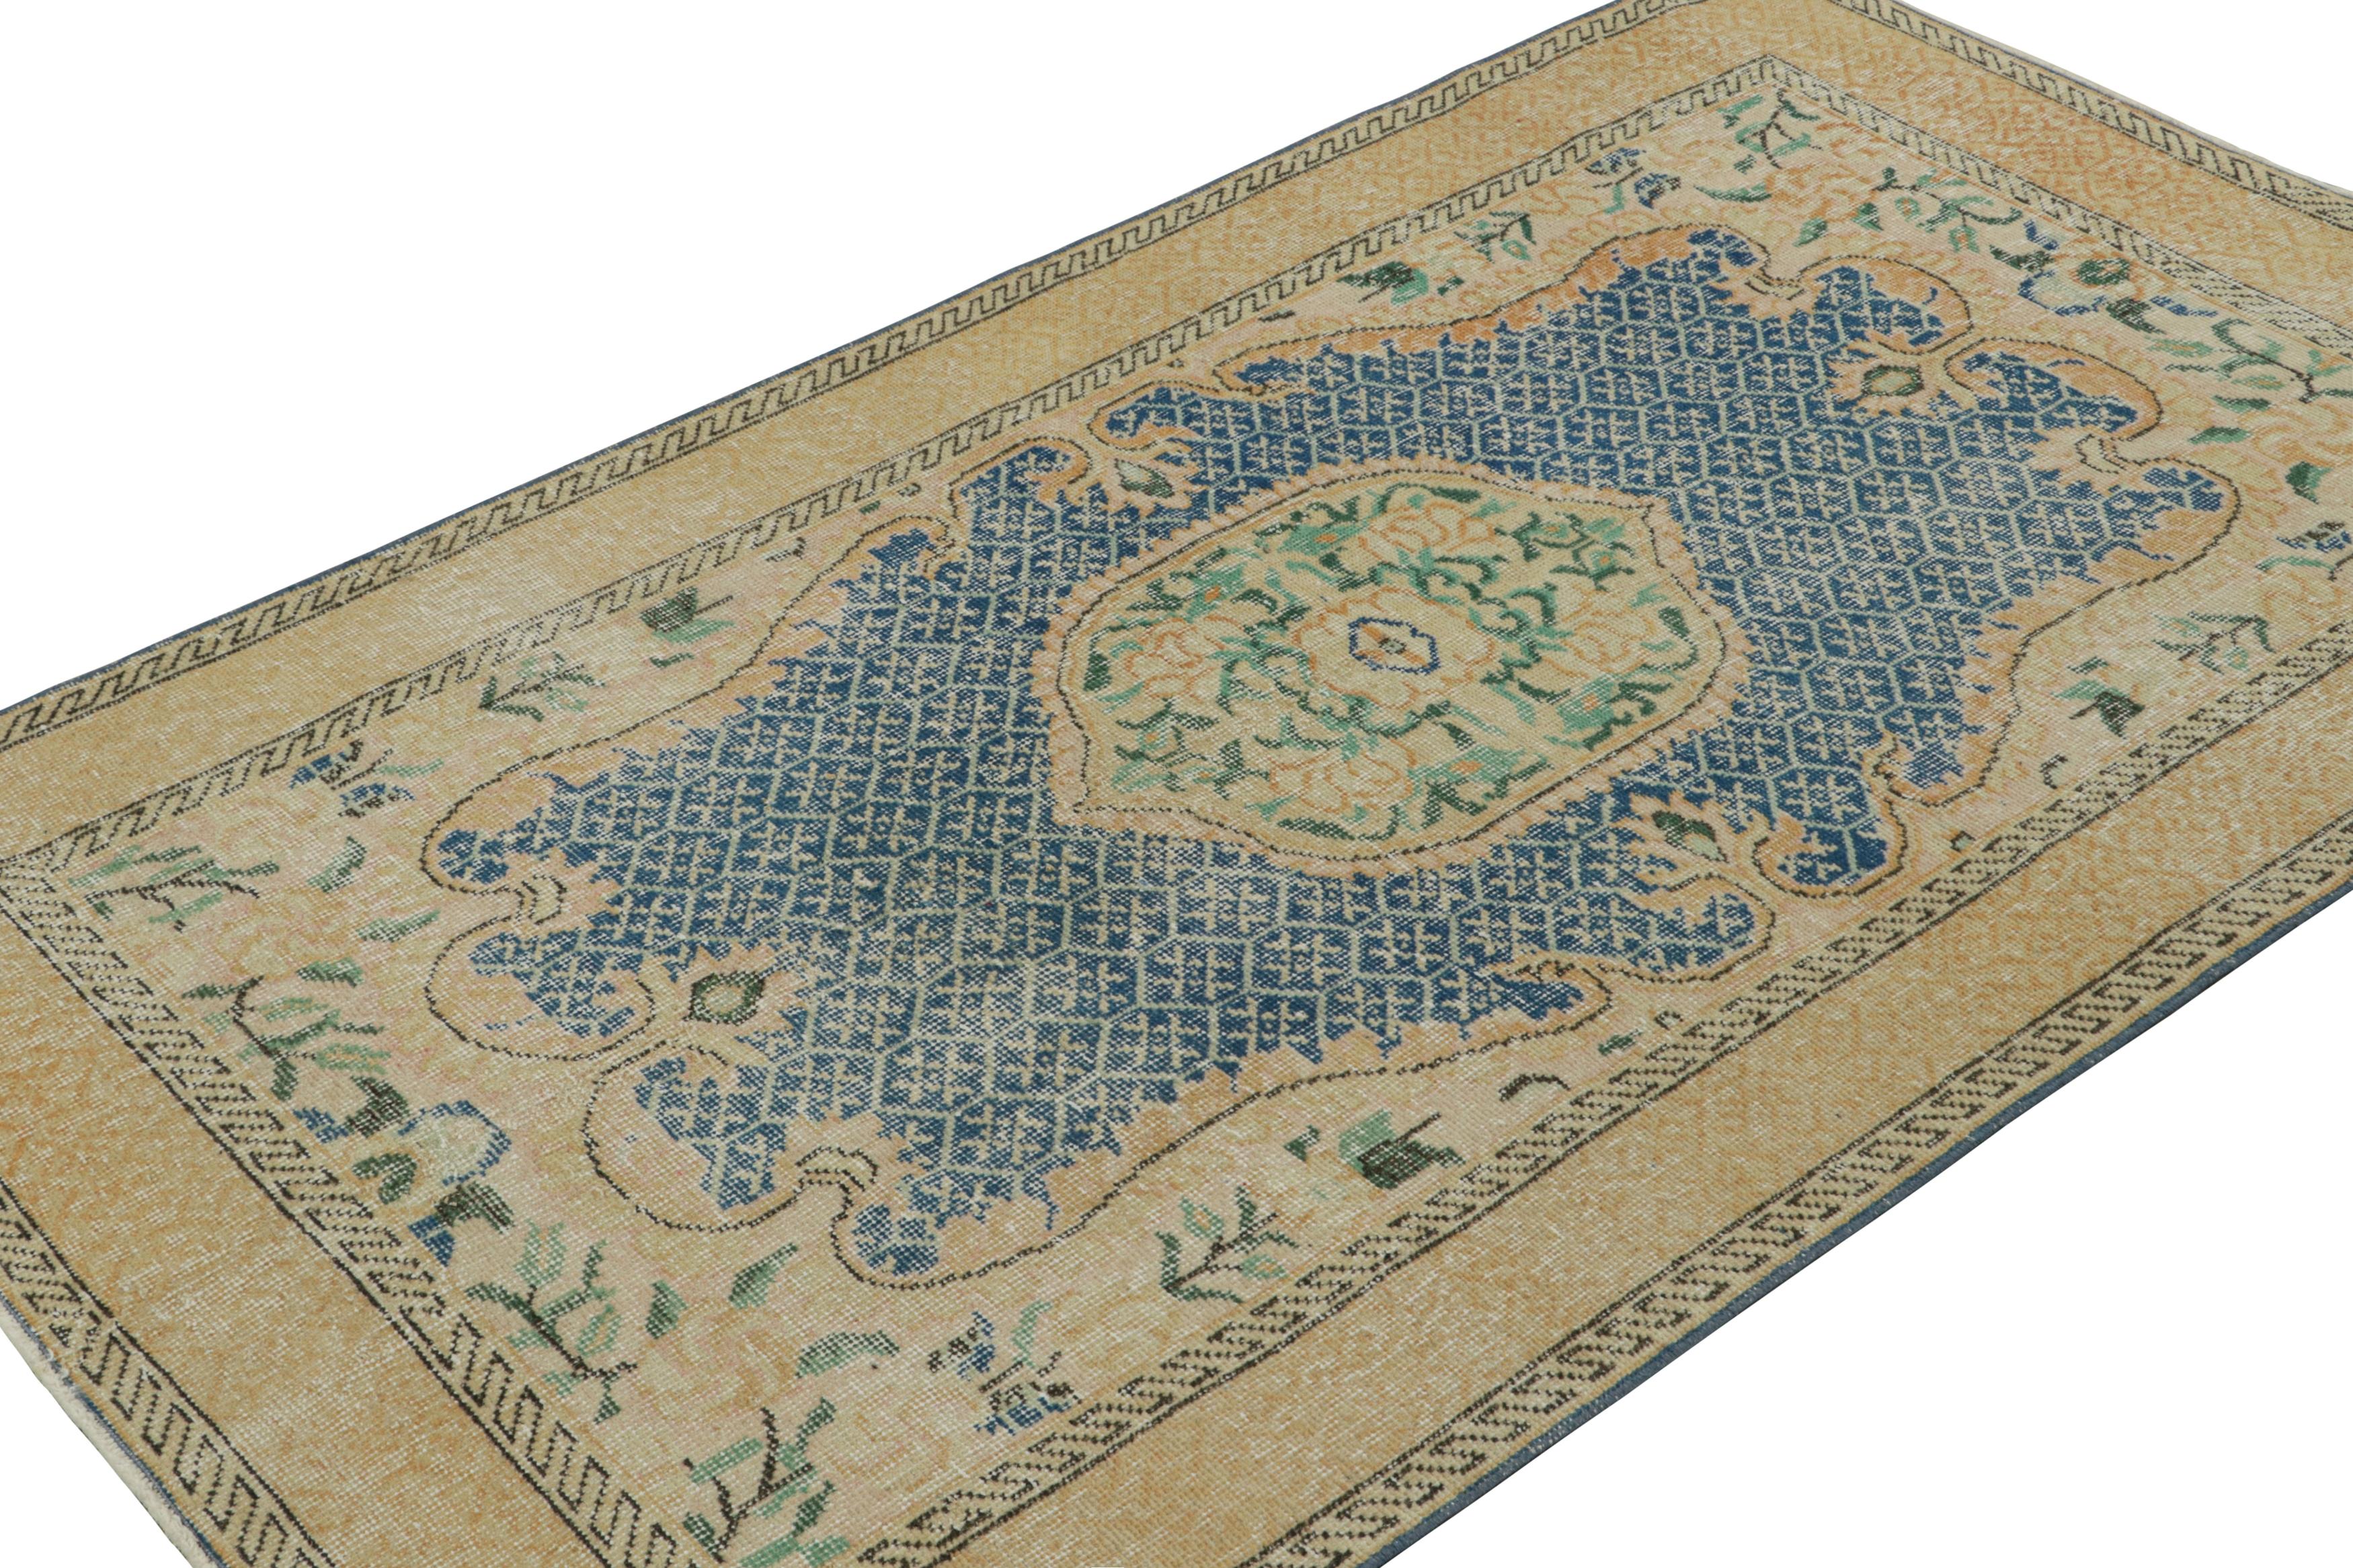 Hand-knotted in wool, circa 1960 - 1970, this 4x6 vintage Müren Aubusson Style rug is an exciting new addition to Rug & Kilim Mid-century Pasha Collection. 

On the Design: 

This Aubusson-style European Müren rug, handmade in wool, showcases the